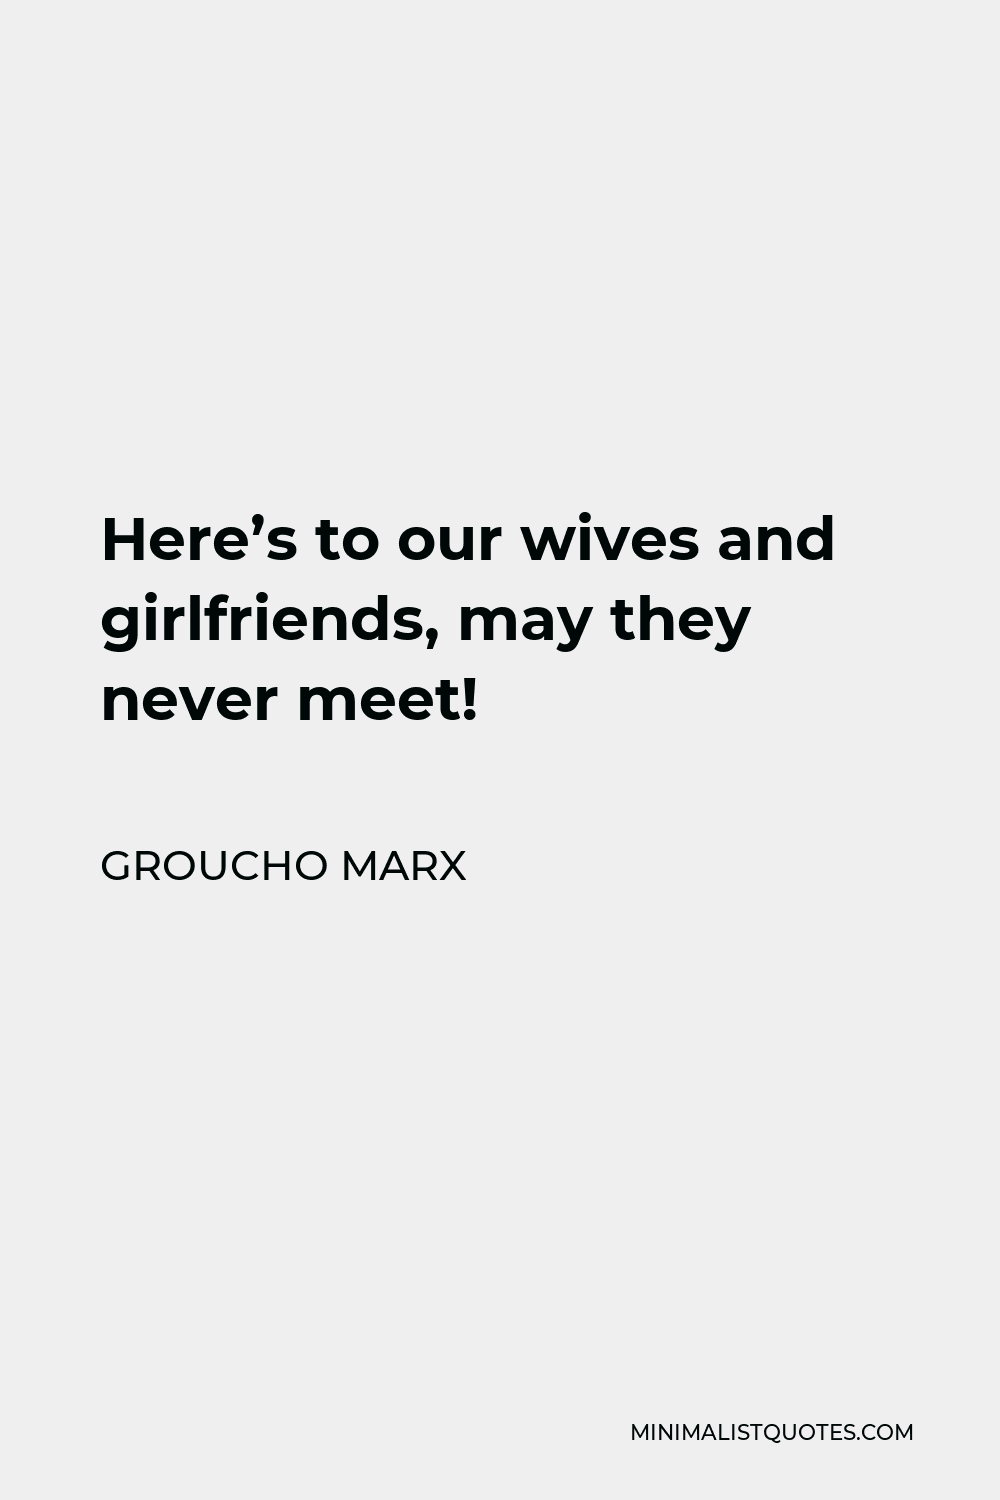 Groucho Marx Quote - Here’s to our wives and girlfriends, may they never meet!